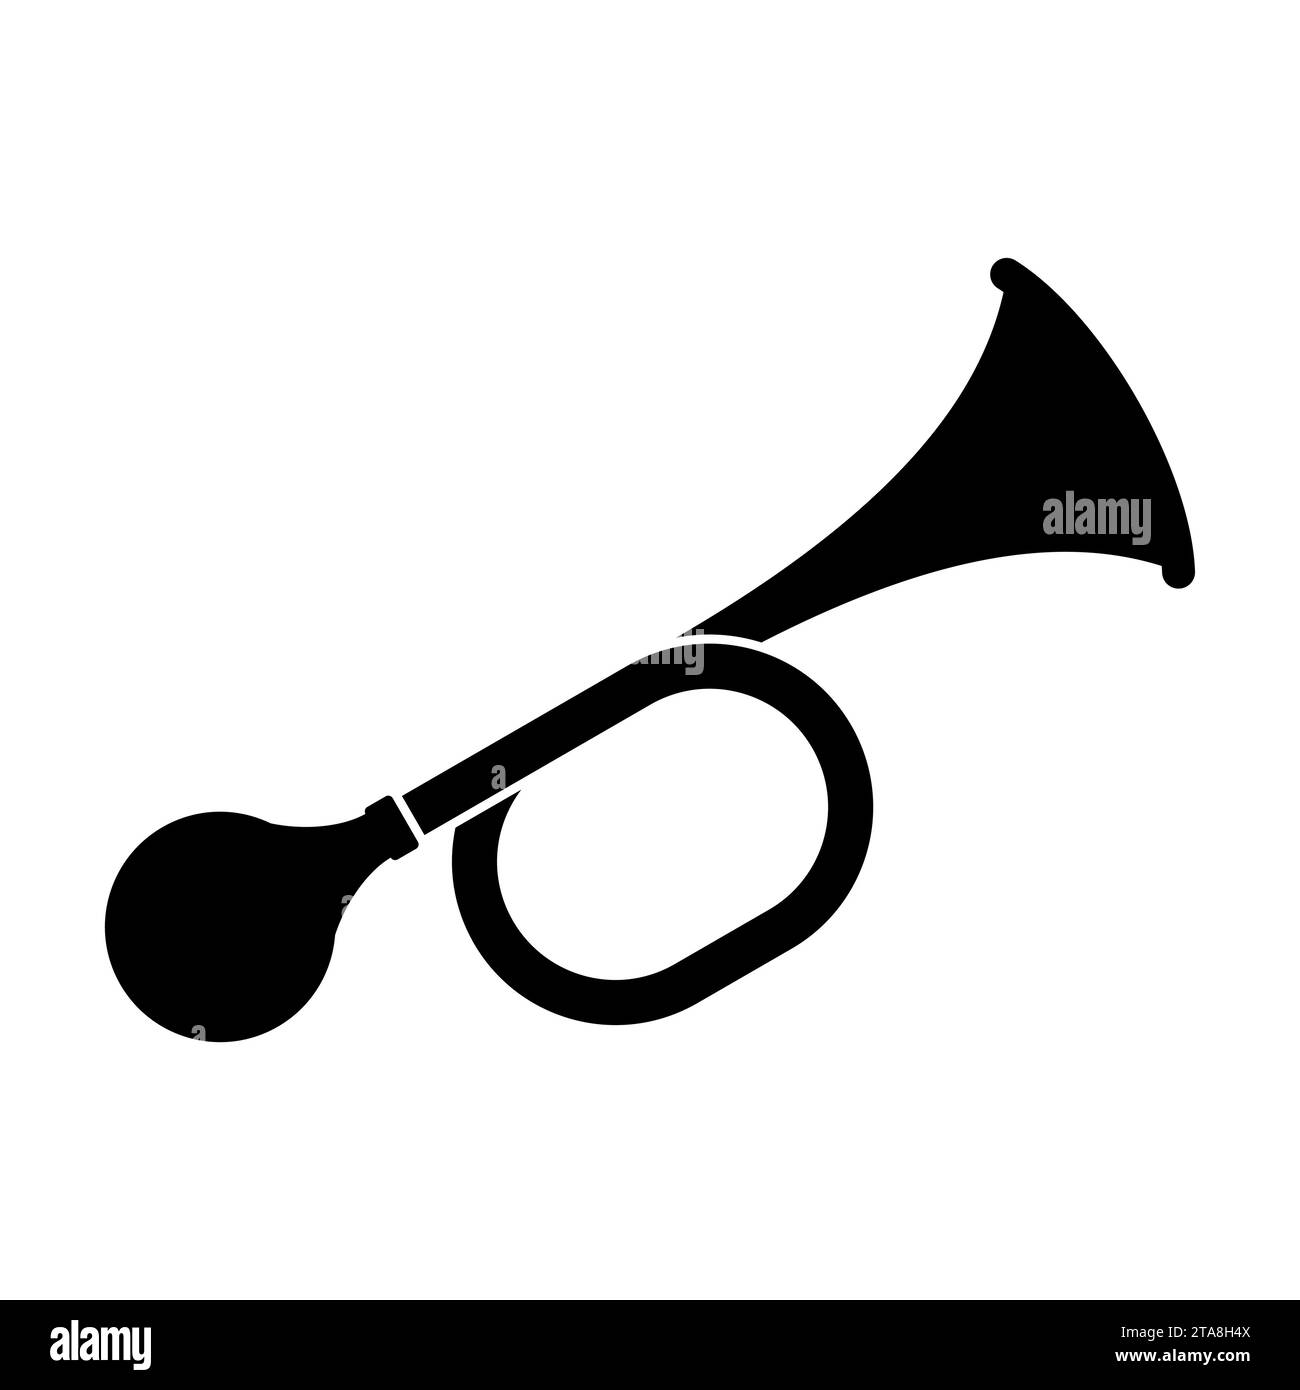 Signal horn icon isolated on white background. Air horn, sound signal symbol. Rubber bike klaxon trumpet. Vector illustration. Stock Vector